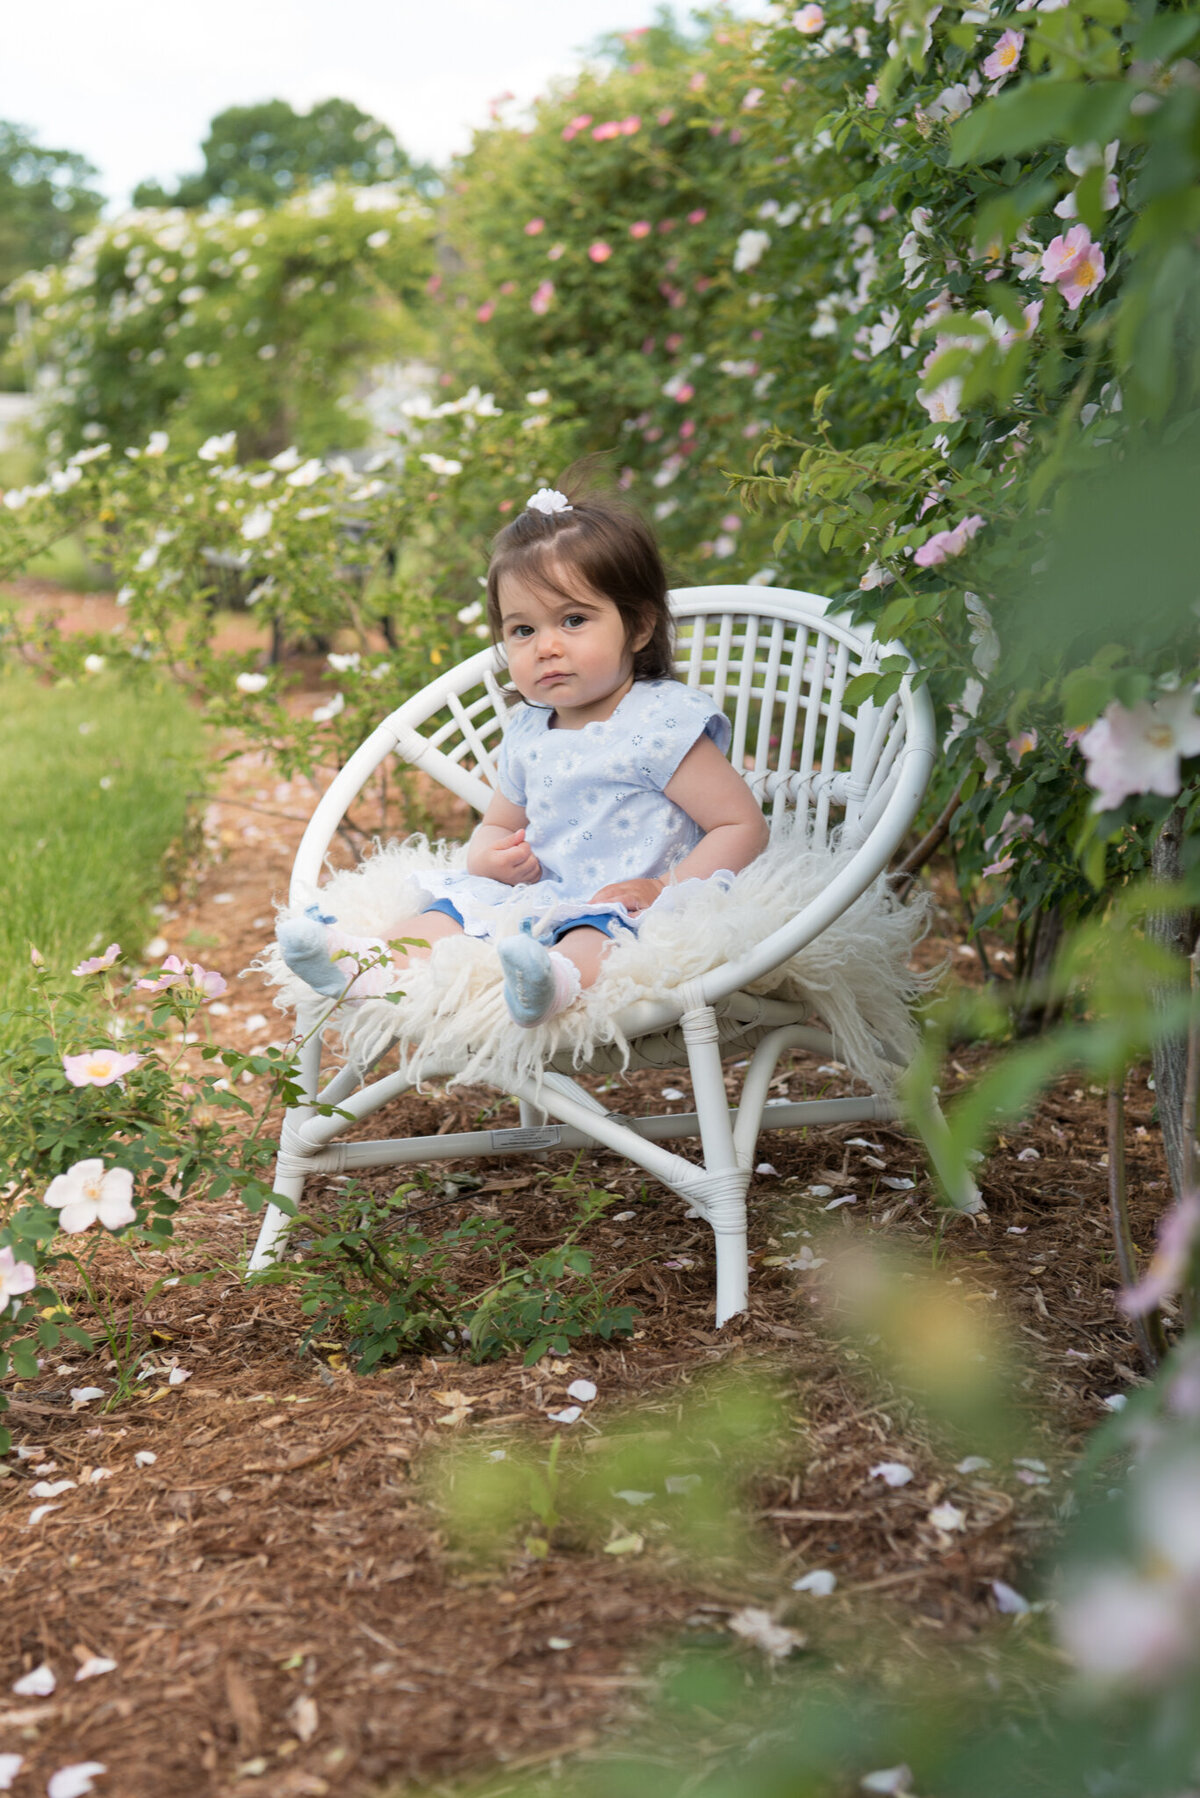 A one-year old girl is looking at the camera, sitting in a white chair in a rose garden